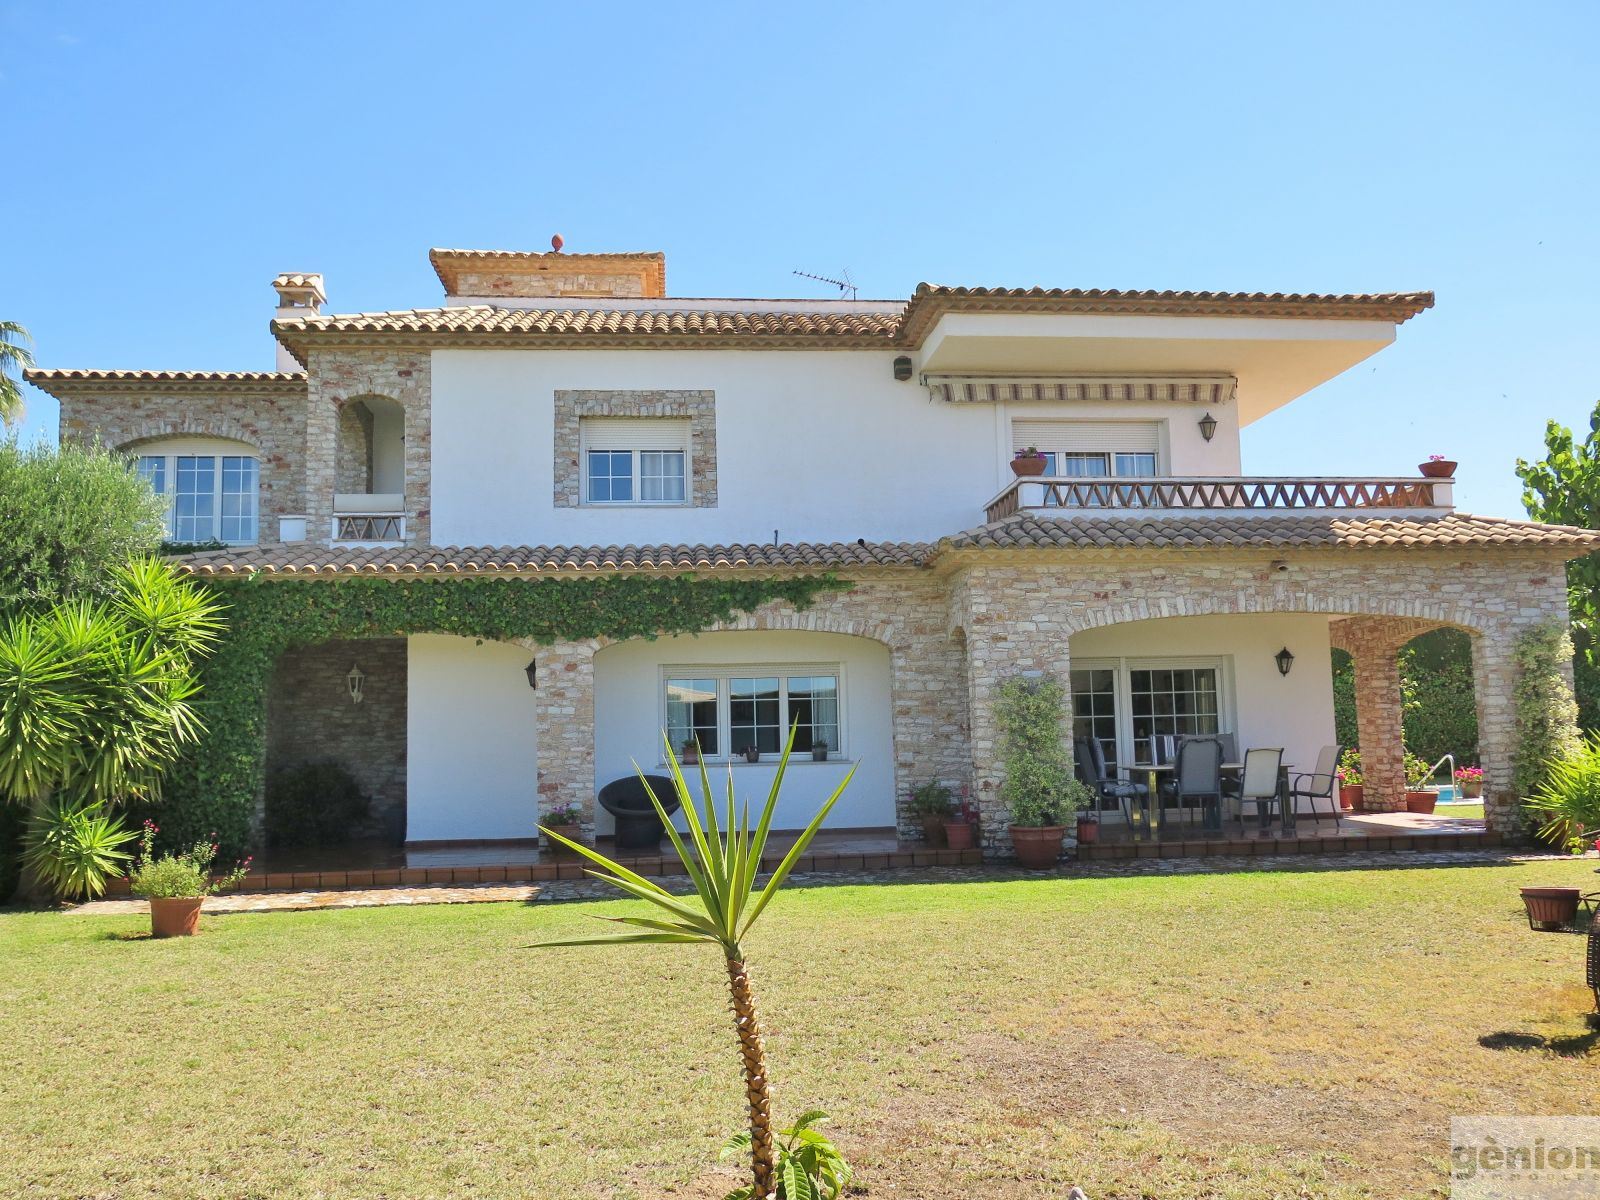 DETACHED HOUSE IN TORREBOSCA, PLATJA D’ARO. RIGHT NEXT TO THE TOWN CENTRE